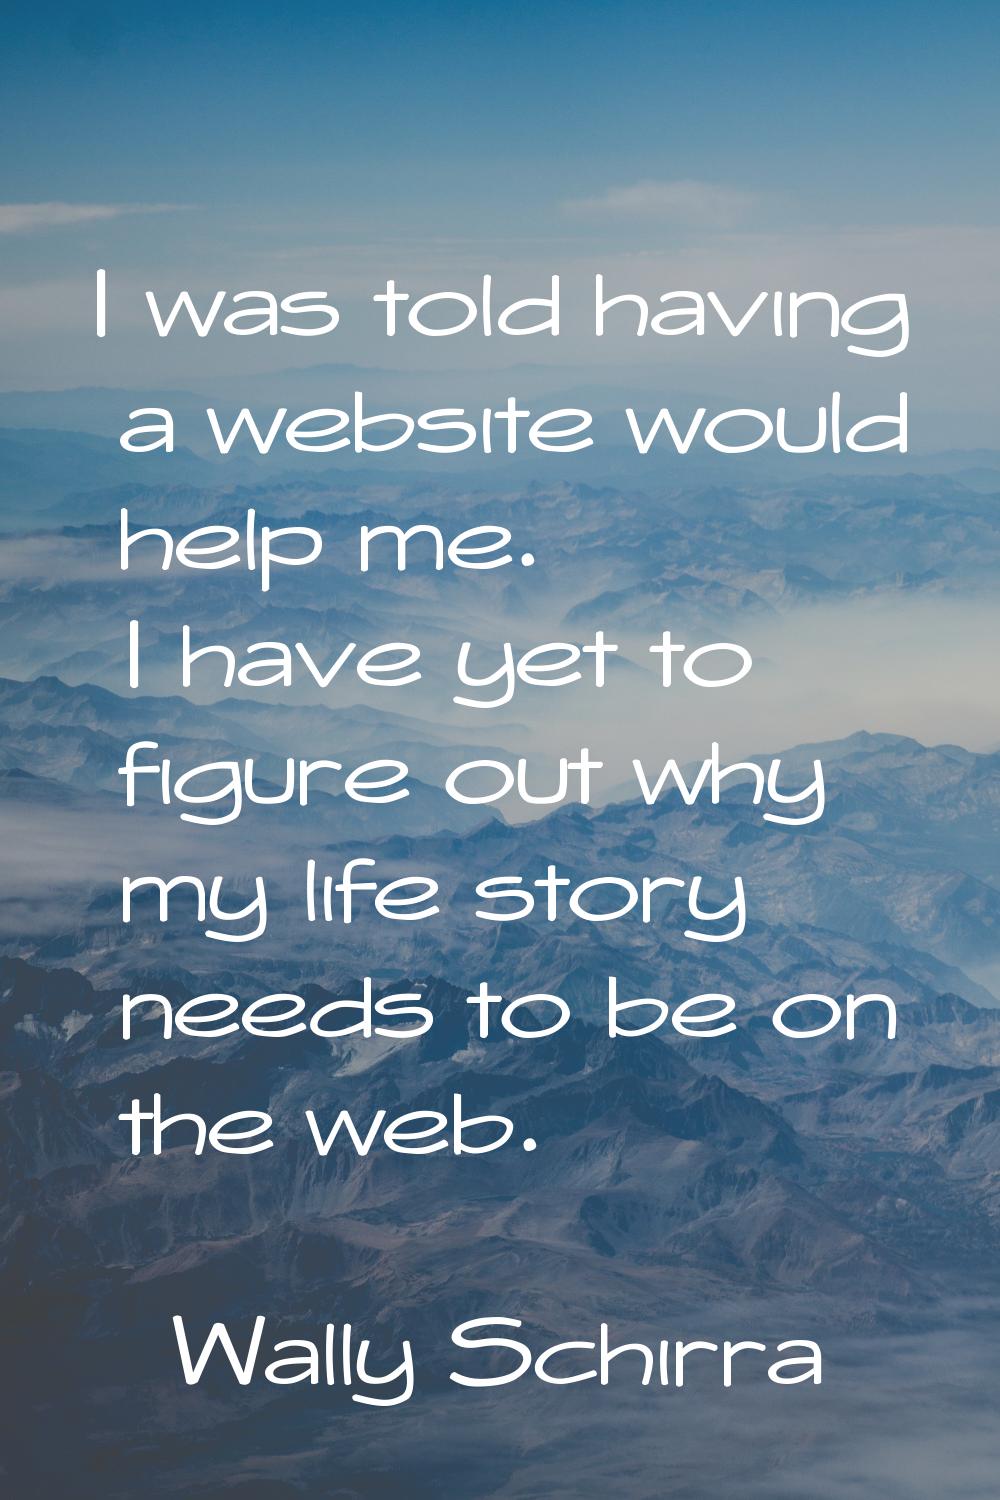 I was told having a website would help me. I have yet to figure out why my life story needs to be o